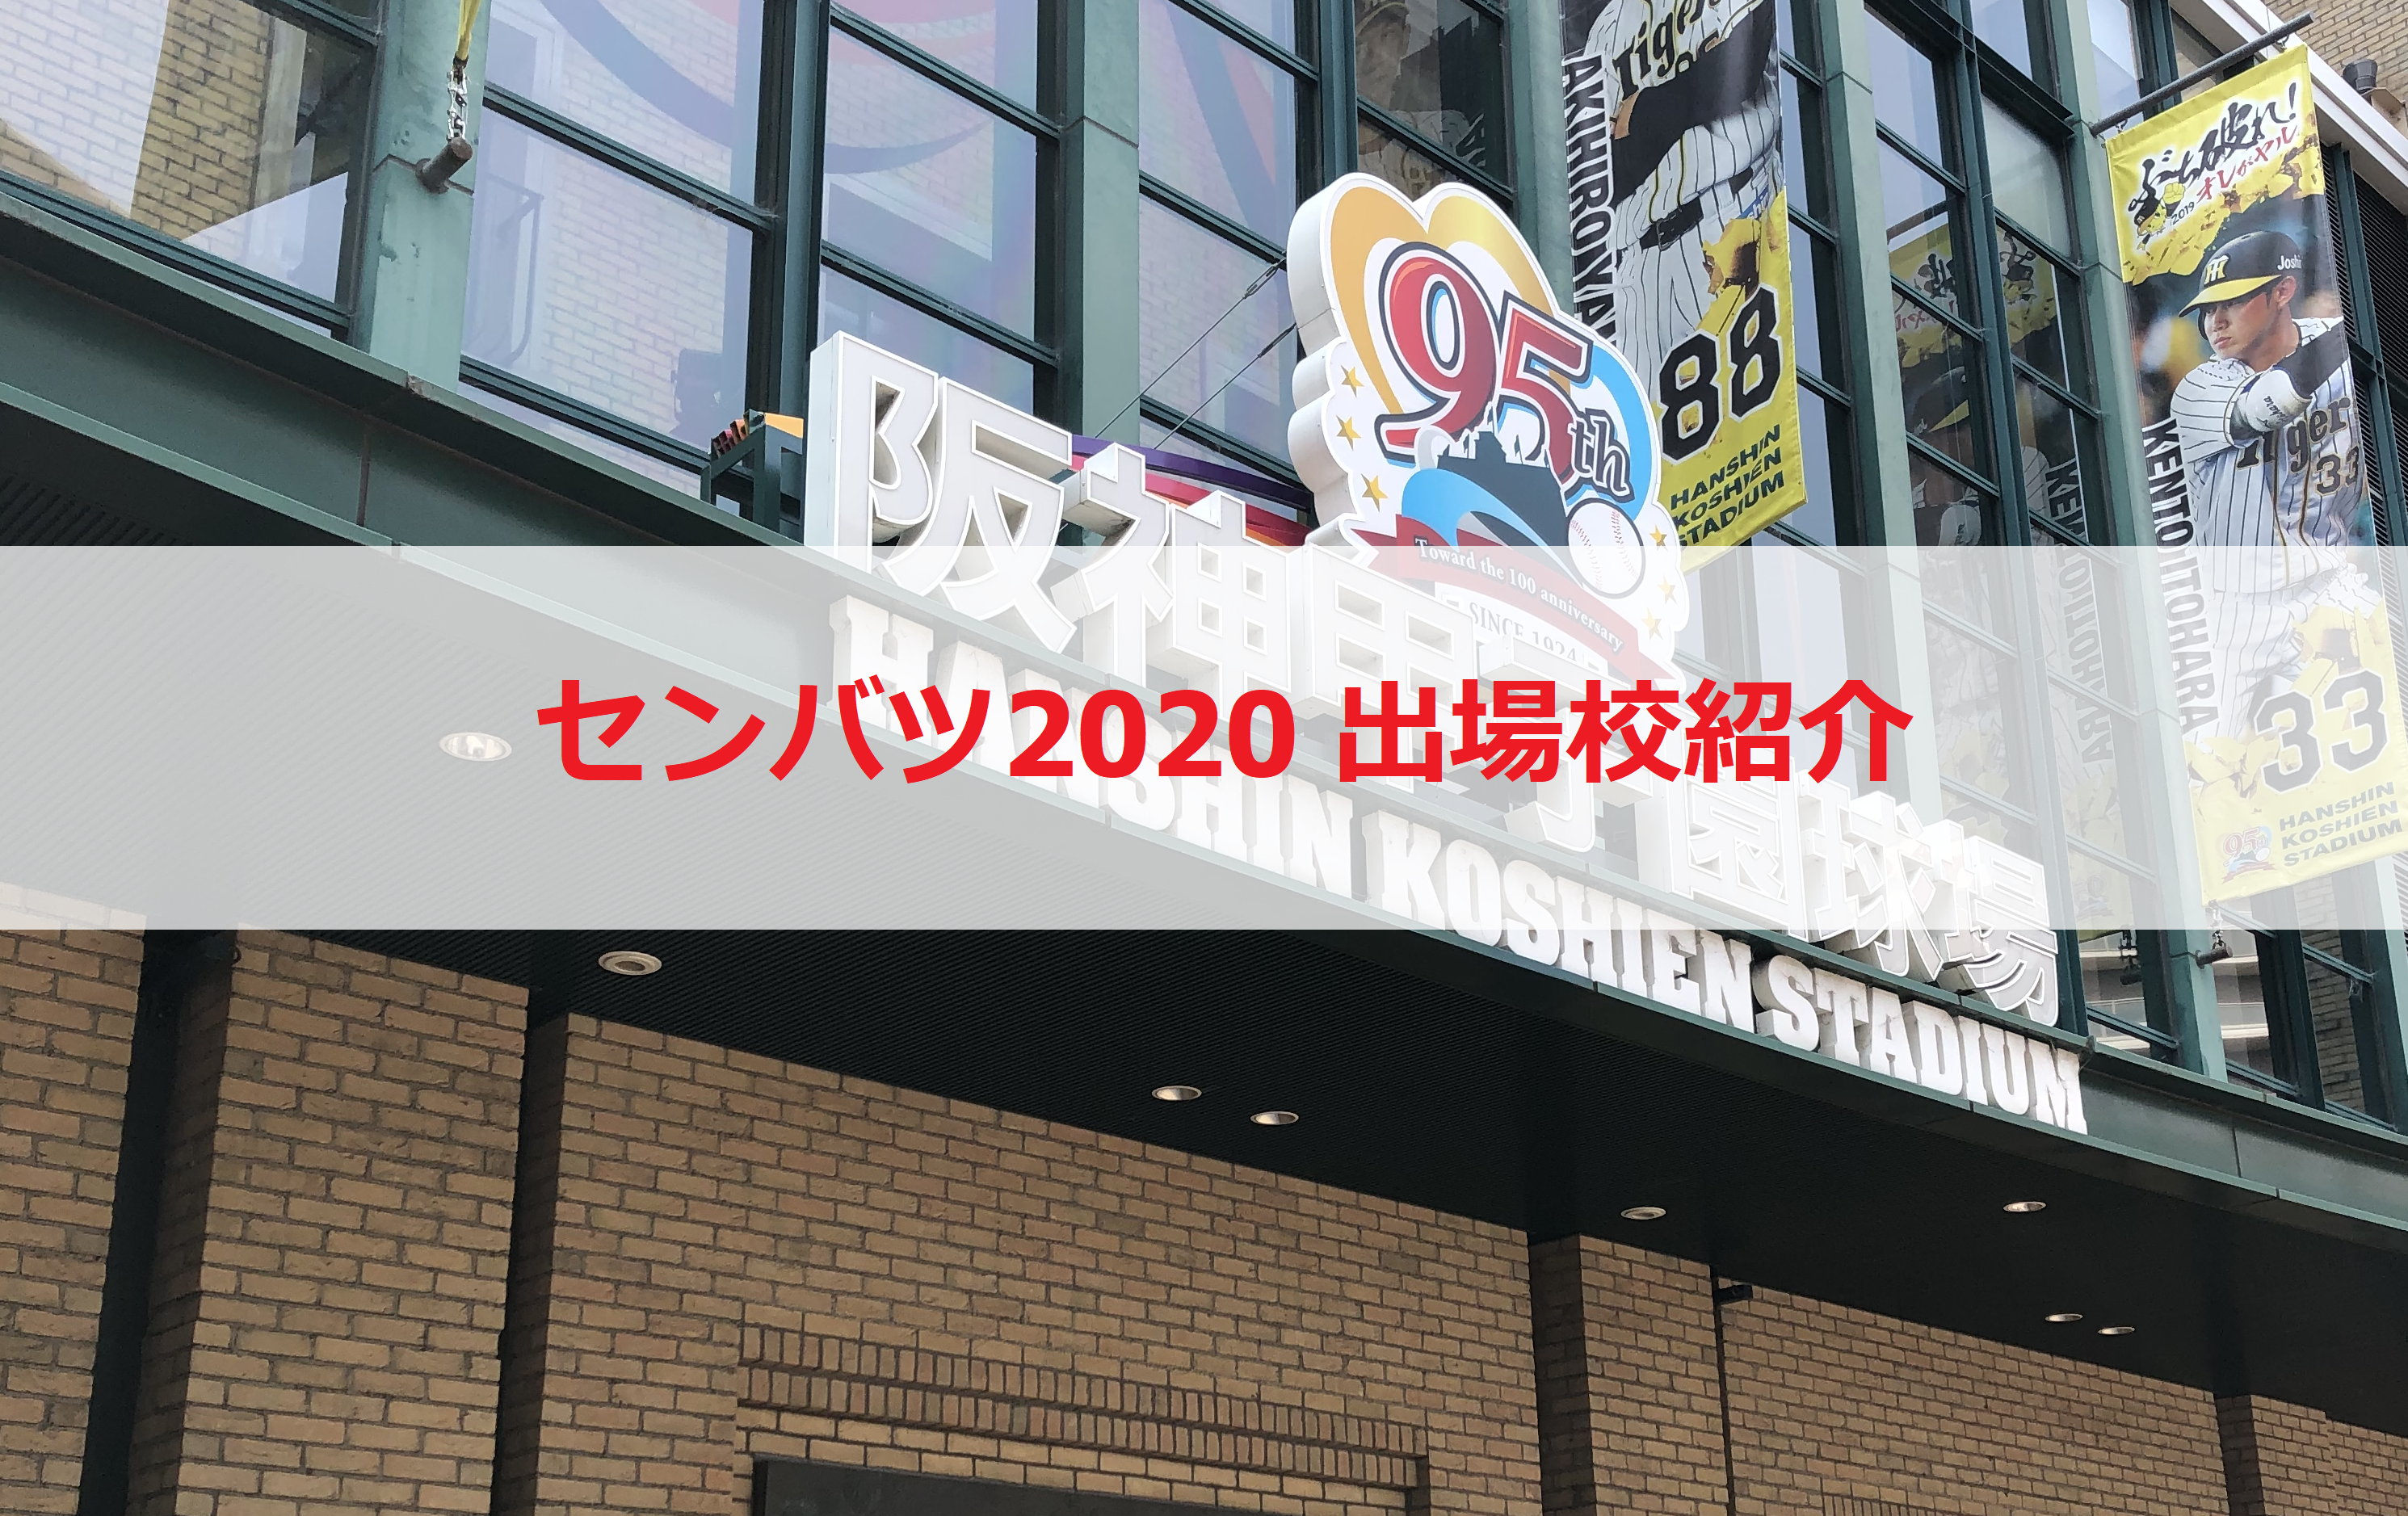 You are currently viewing センバツ2020 尽誠学園高校　ベンチ入りメンバーや出身中学を紹介！